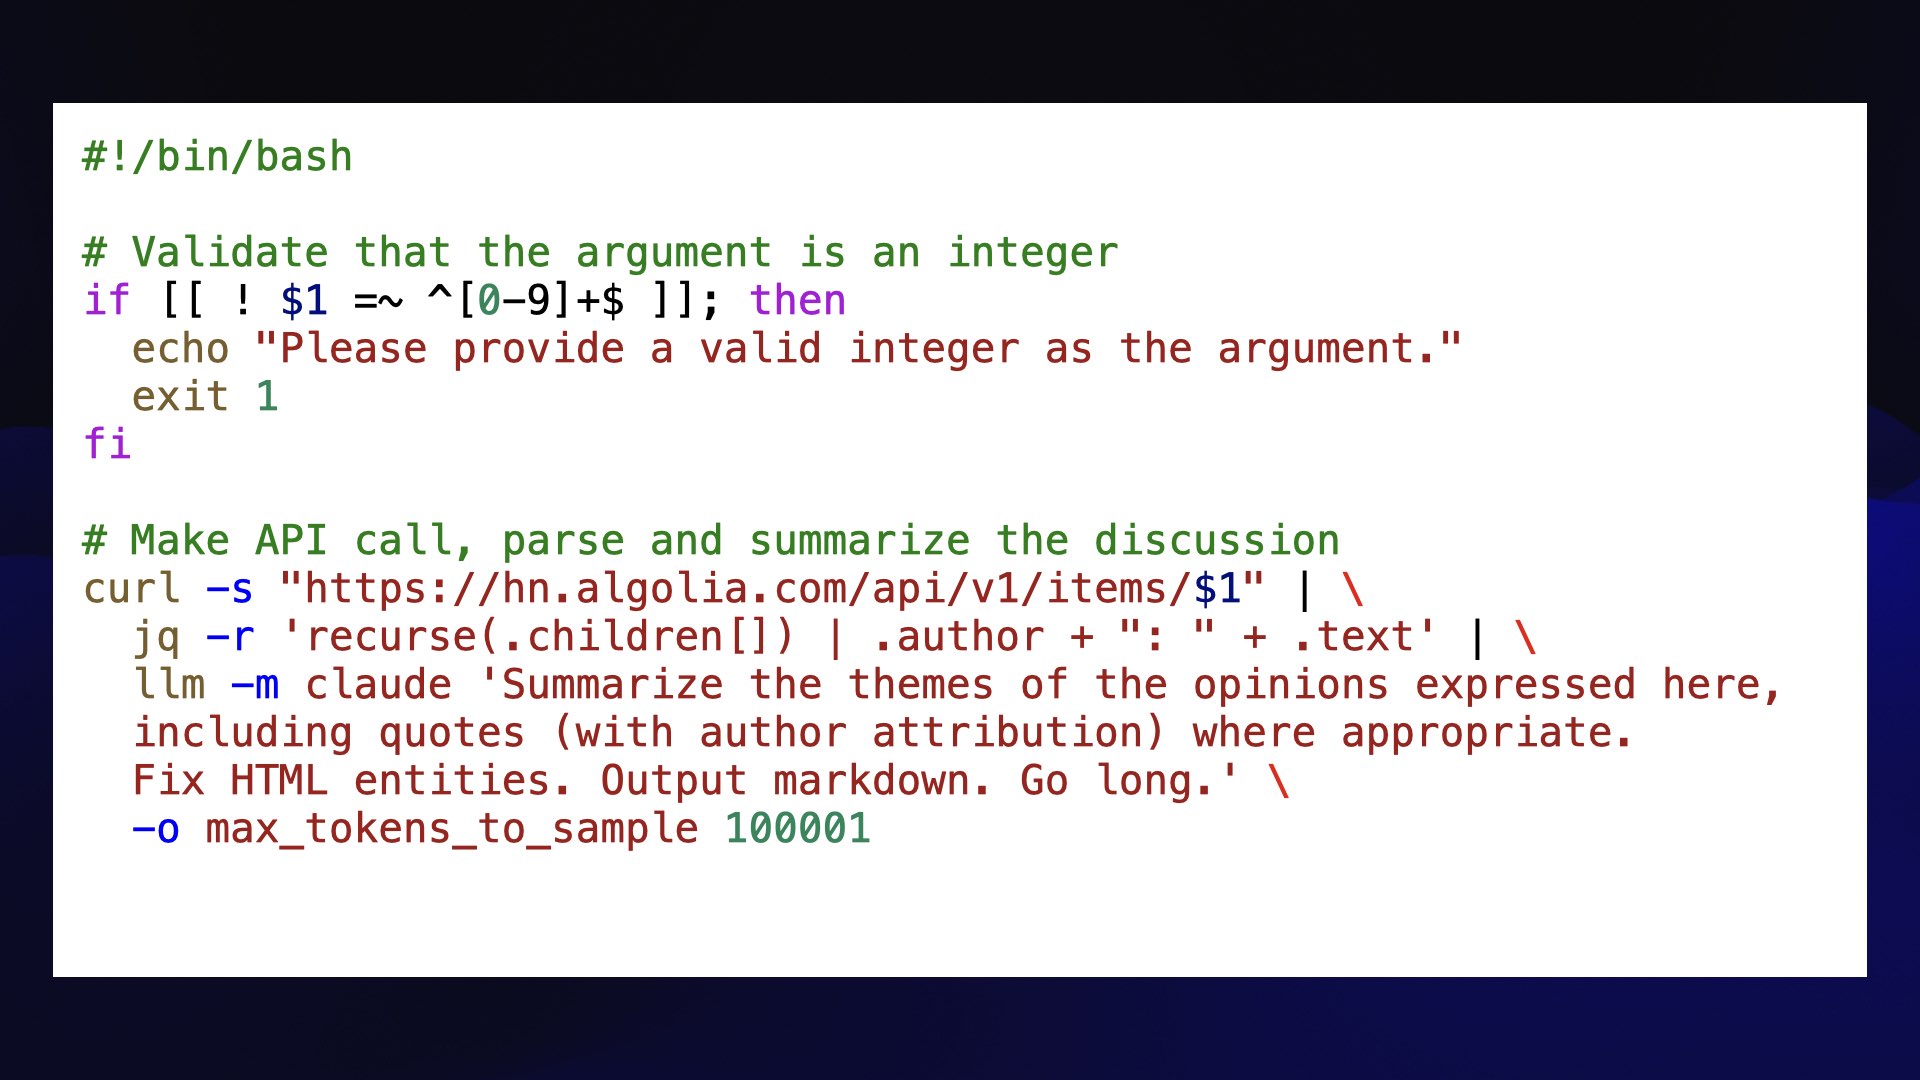 #!/bin/bash  # Validate that the argument is an integer if [[ ! $1 =~ ^[0-9]+$ ]]; then   echo "Please provide a valid integer as the argument."   exit 1 fi  # Make API call, parse and summarize the discussion curl -s "https://hn.algolia.com/api/v1/items/$1" | \   jq -r 'recurse(.children[]) | .author + ": " + .text' | \   llm -m claude 'Summarize the themes of the opinions expressed here,   including quotes (with author attribution) where appropriate.   Fix HTML entities. Output markdown. Go long.' \   -o max_tokens_to_sample 100001